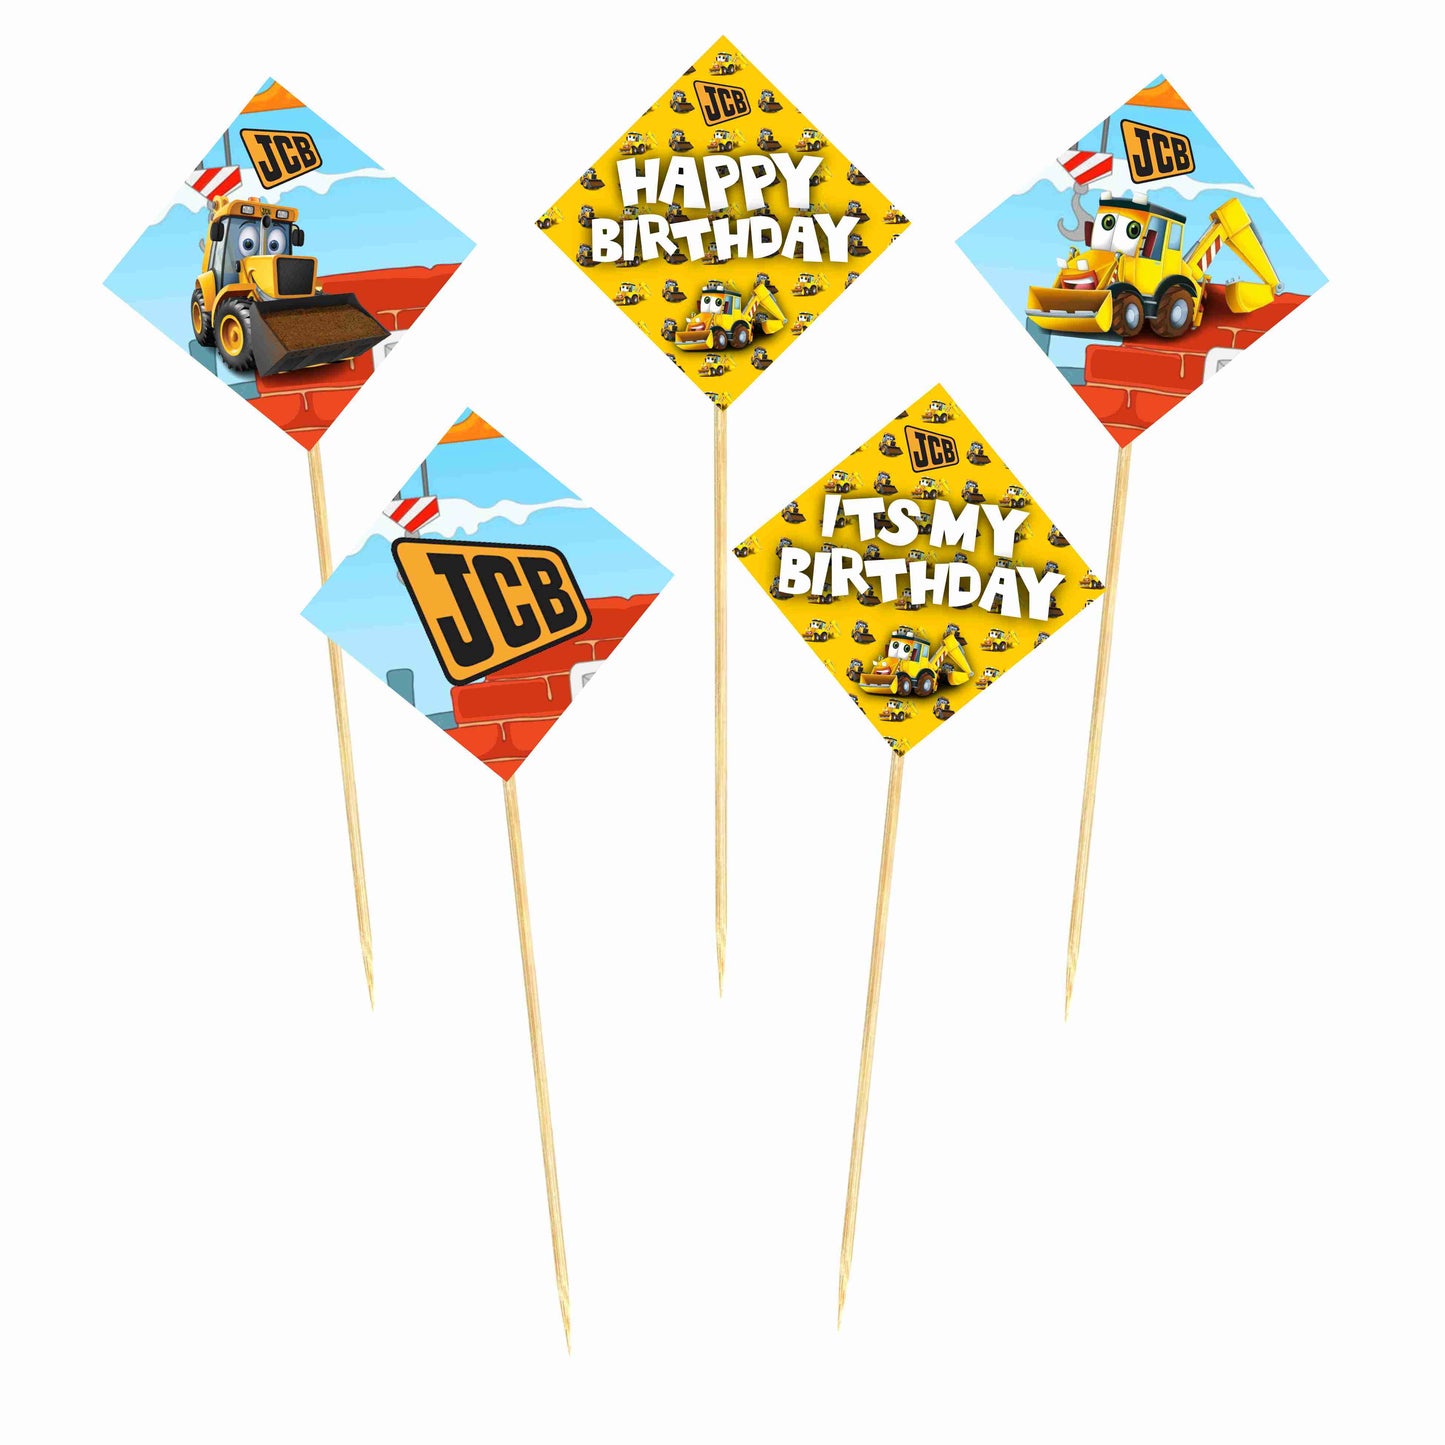 JCB Theme Cake Topper Pack of 10 Nos for Birthday Cake Decoration Theme Party Item For Boys Girls Adults Birthday Theme Decor